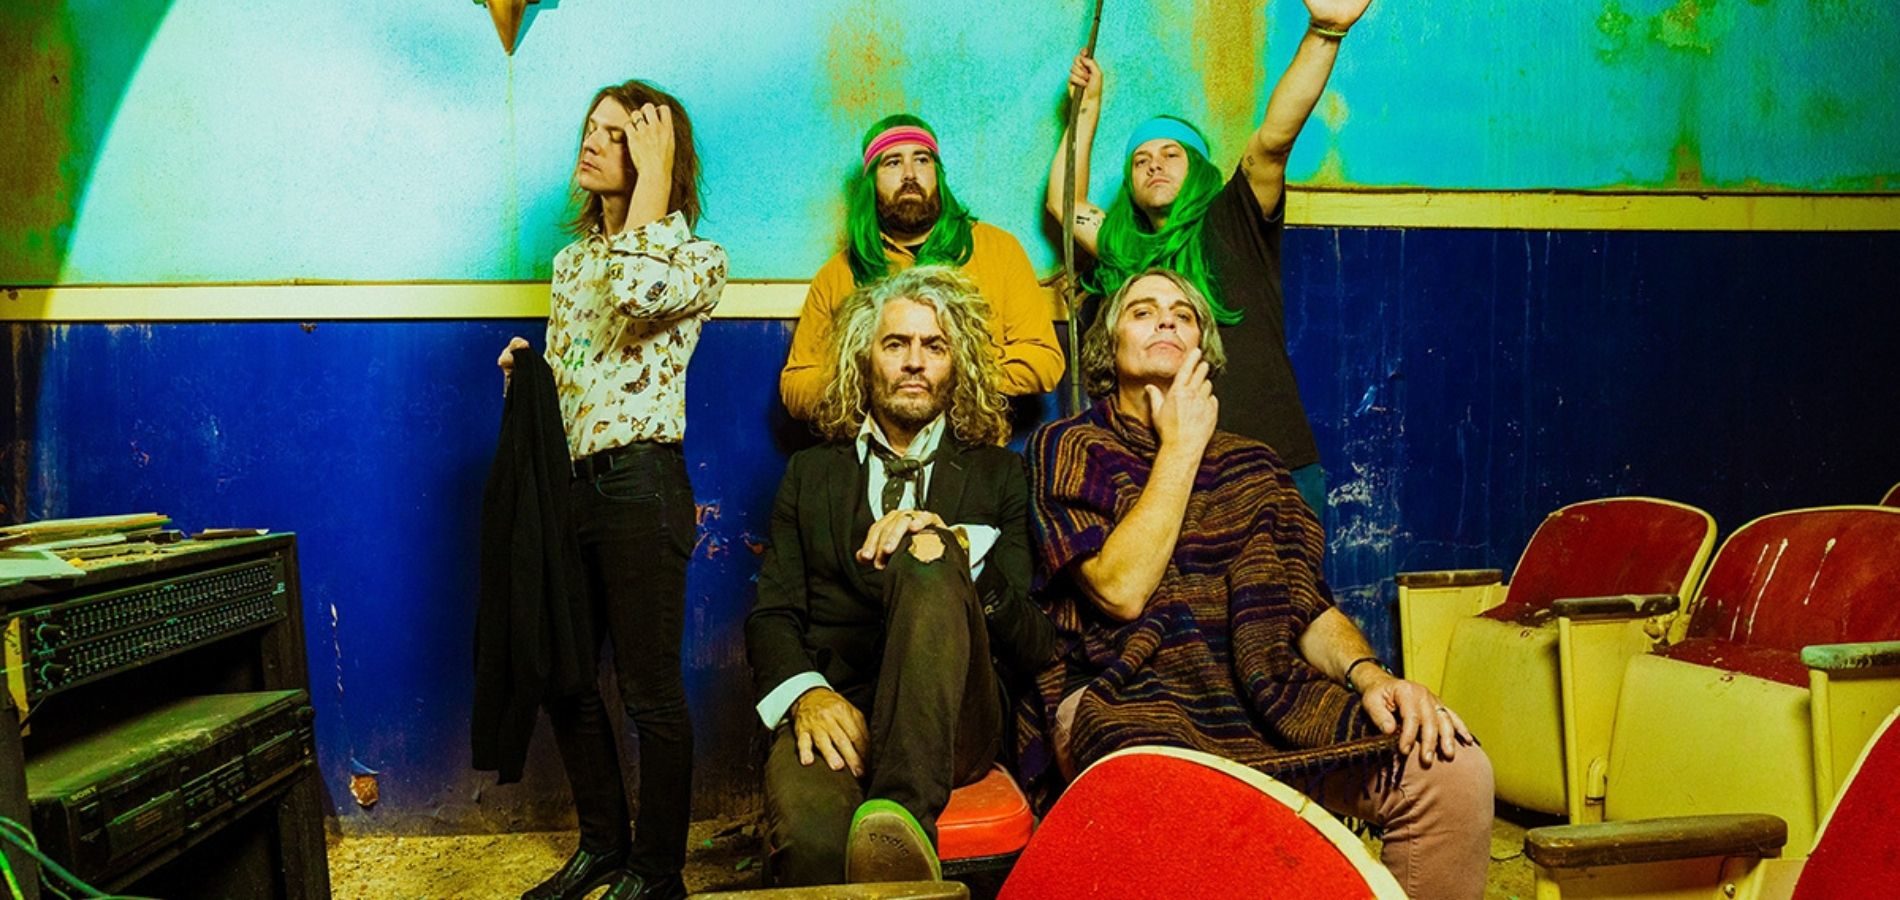 The Flaming Lips – American Head American Tour